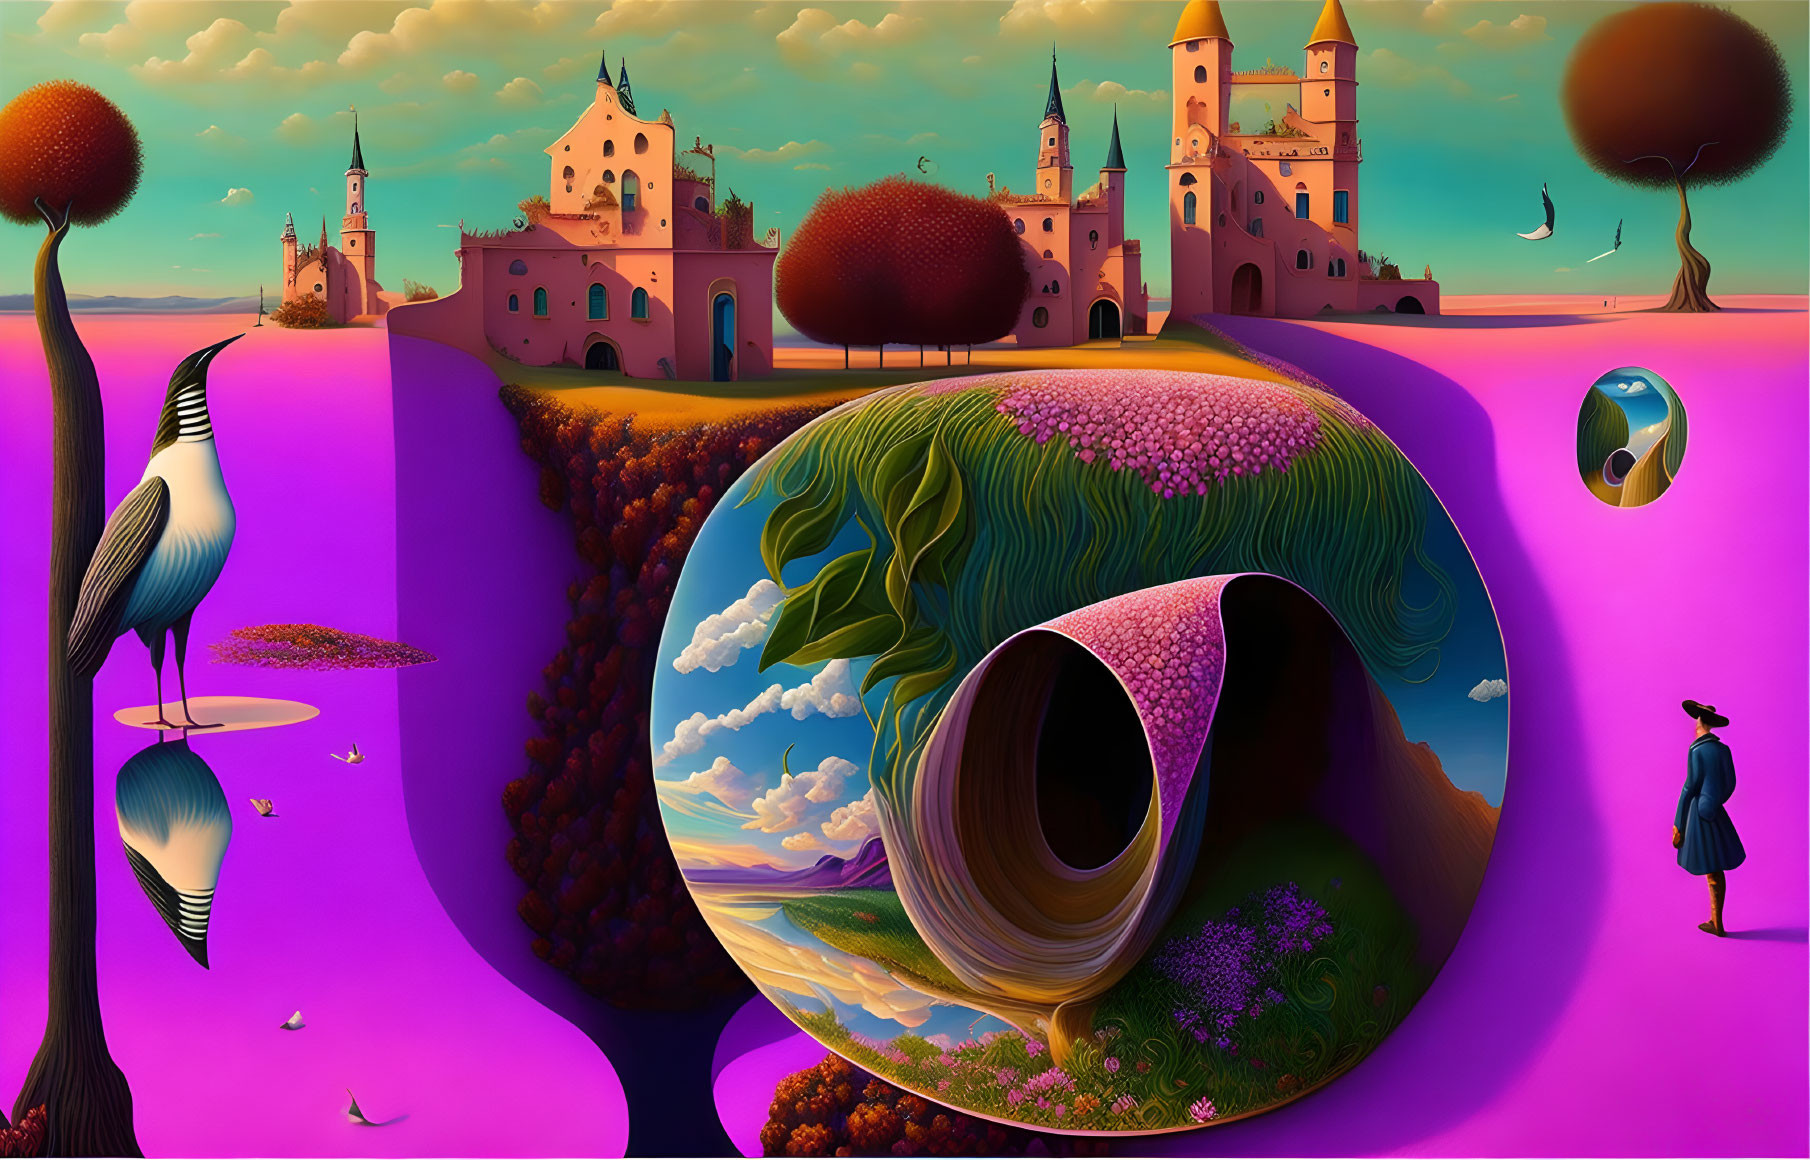 Surreal landscape with whimsical architecture and floating islands